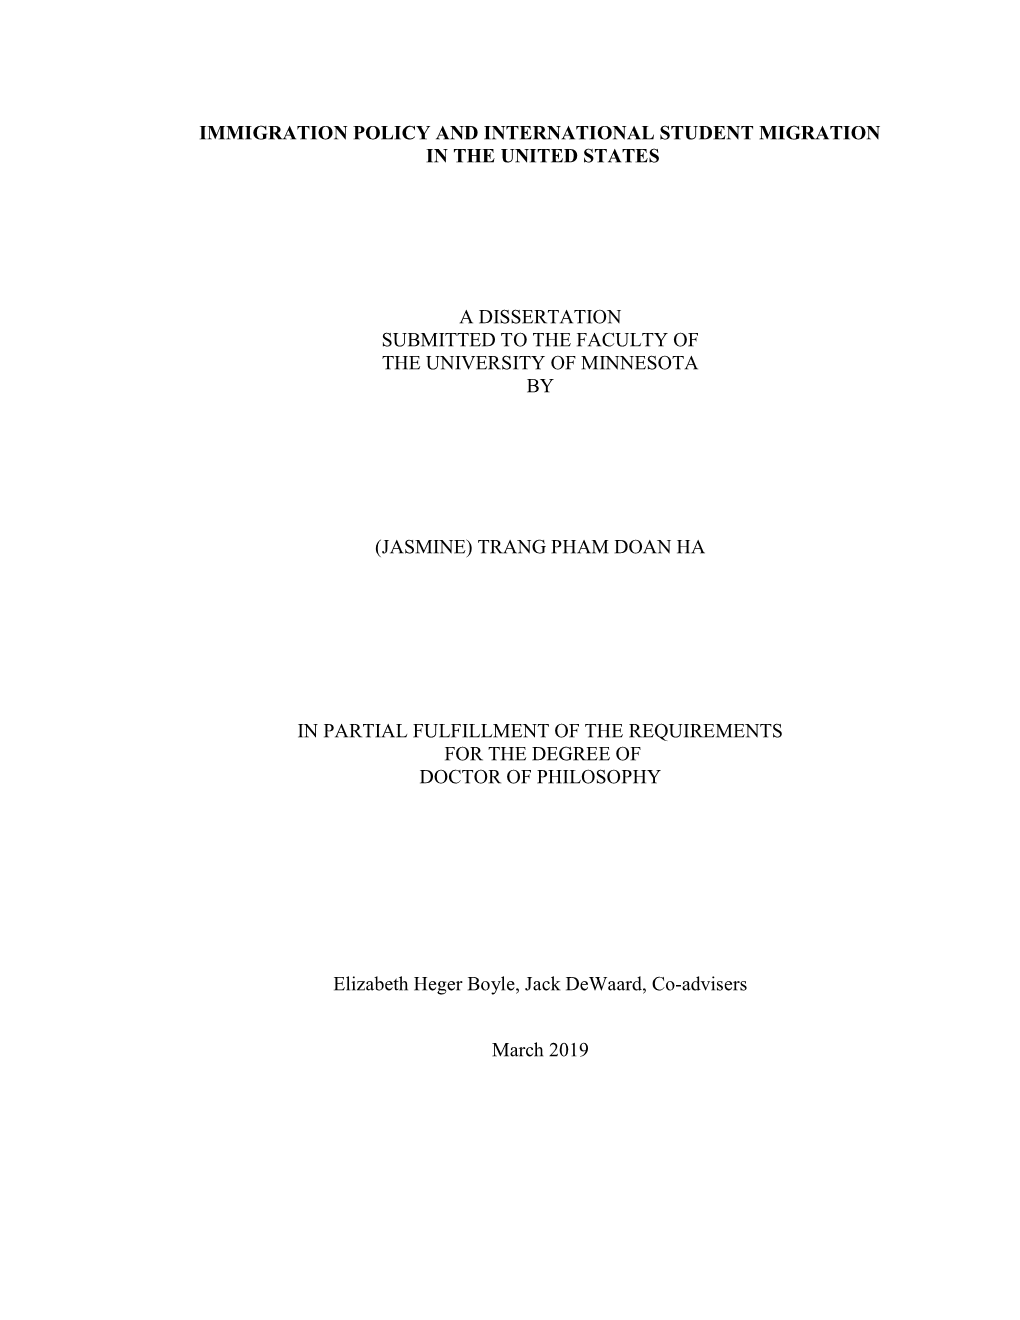 Immigration Policy and International Student Migration in the United States a Dissertation Submitted to the Faculty of the Unive